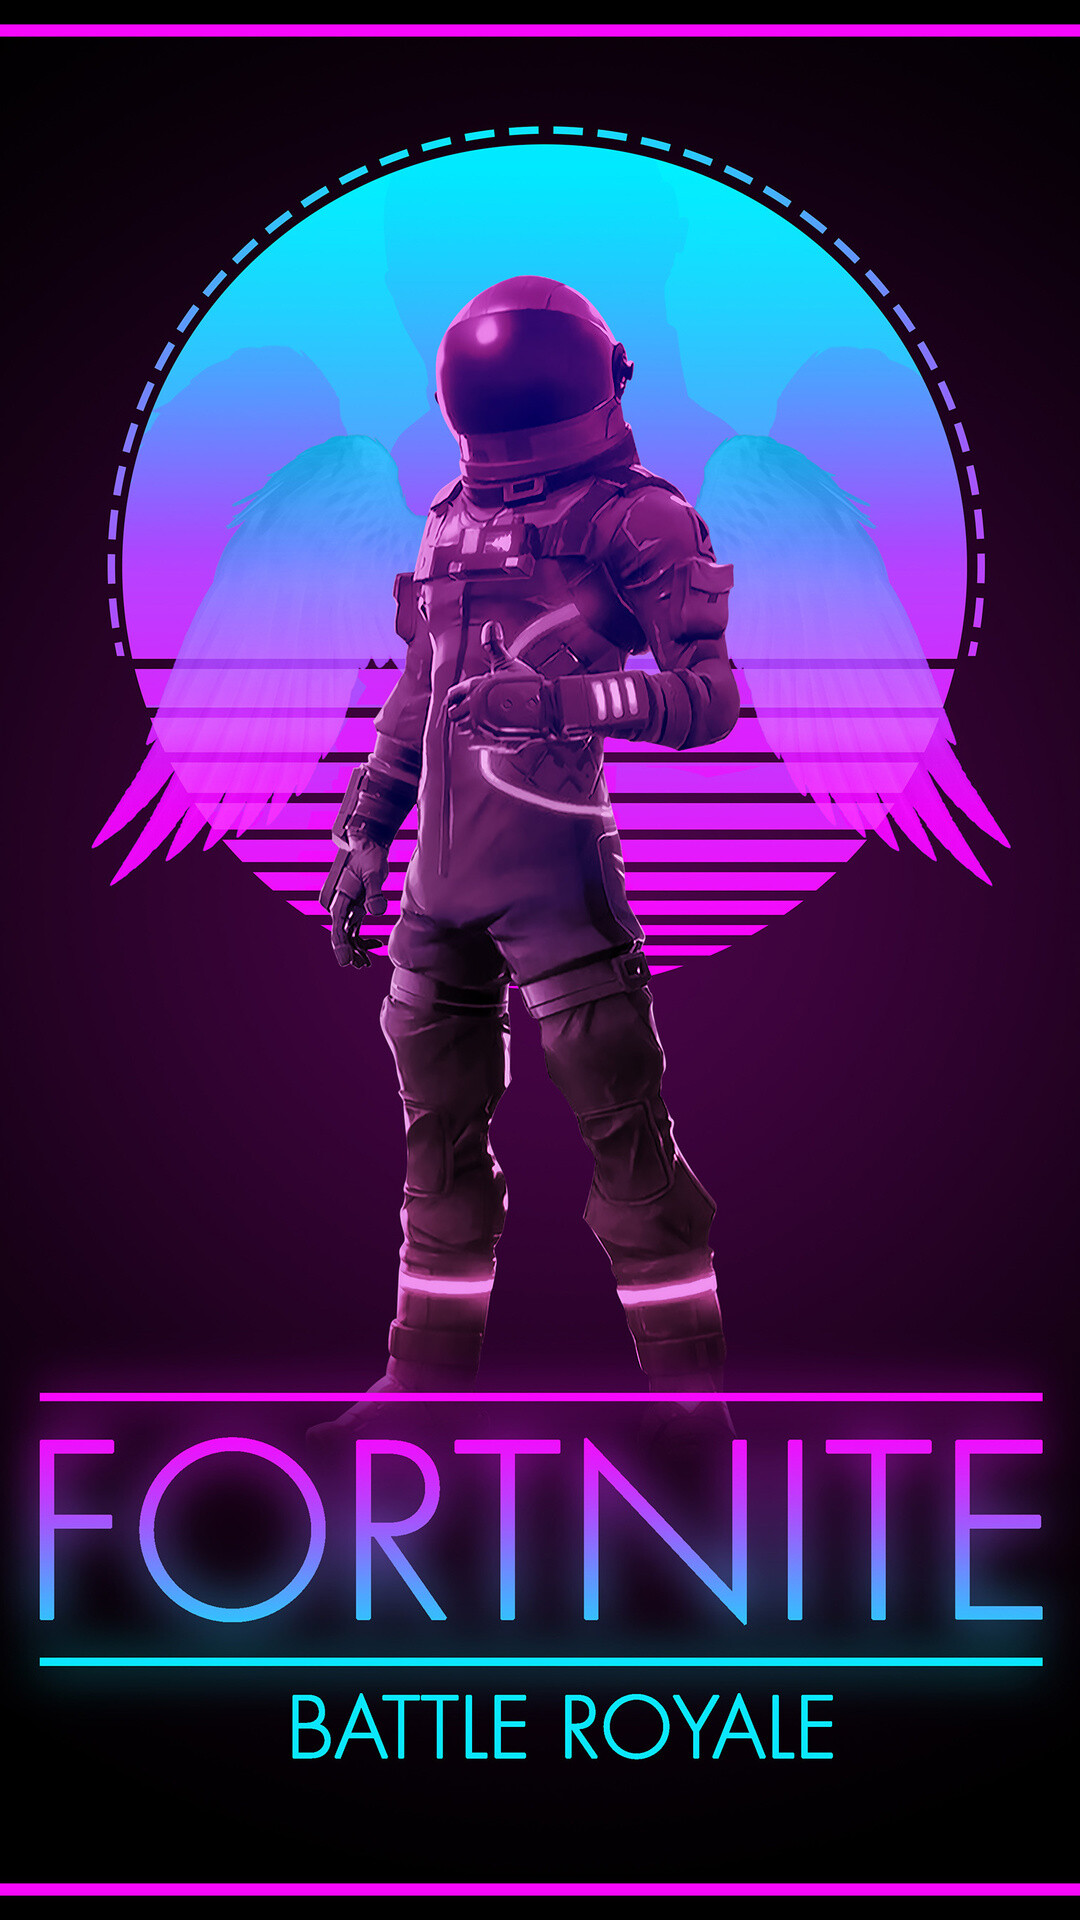 Fortnite: Battle Royale, Player-versus-player game for up to 100 players, allowing one to play alone, in a duo, or in a squad. 1080x1920 Full HD Background.